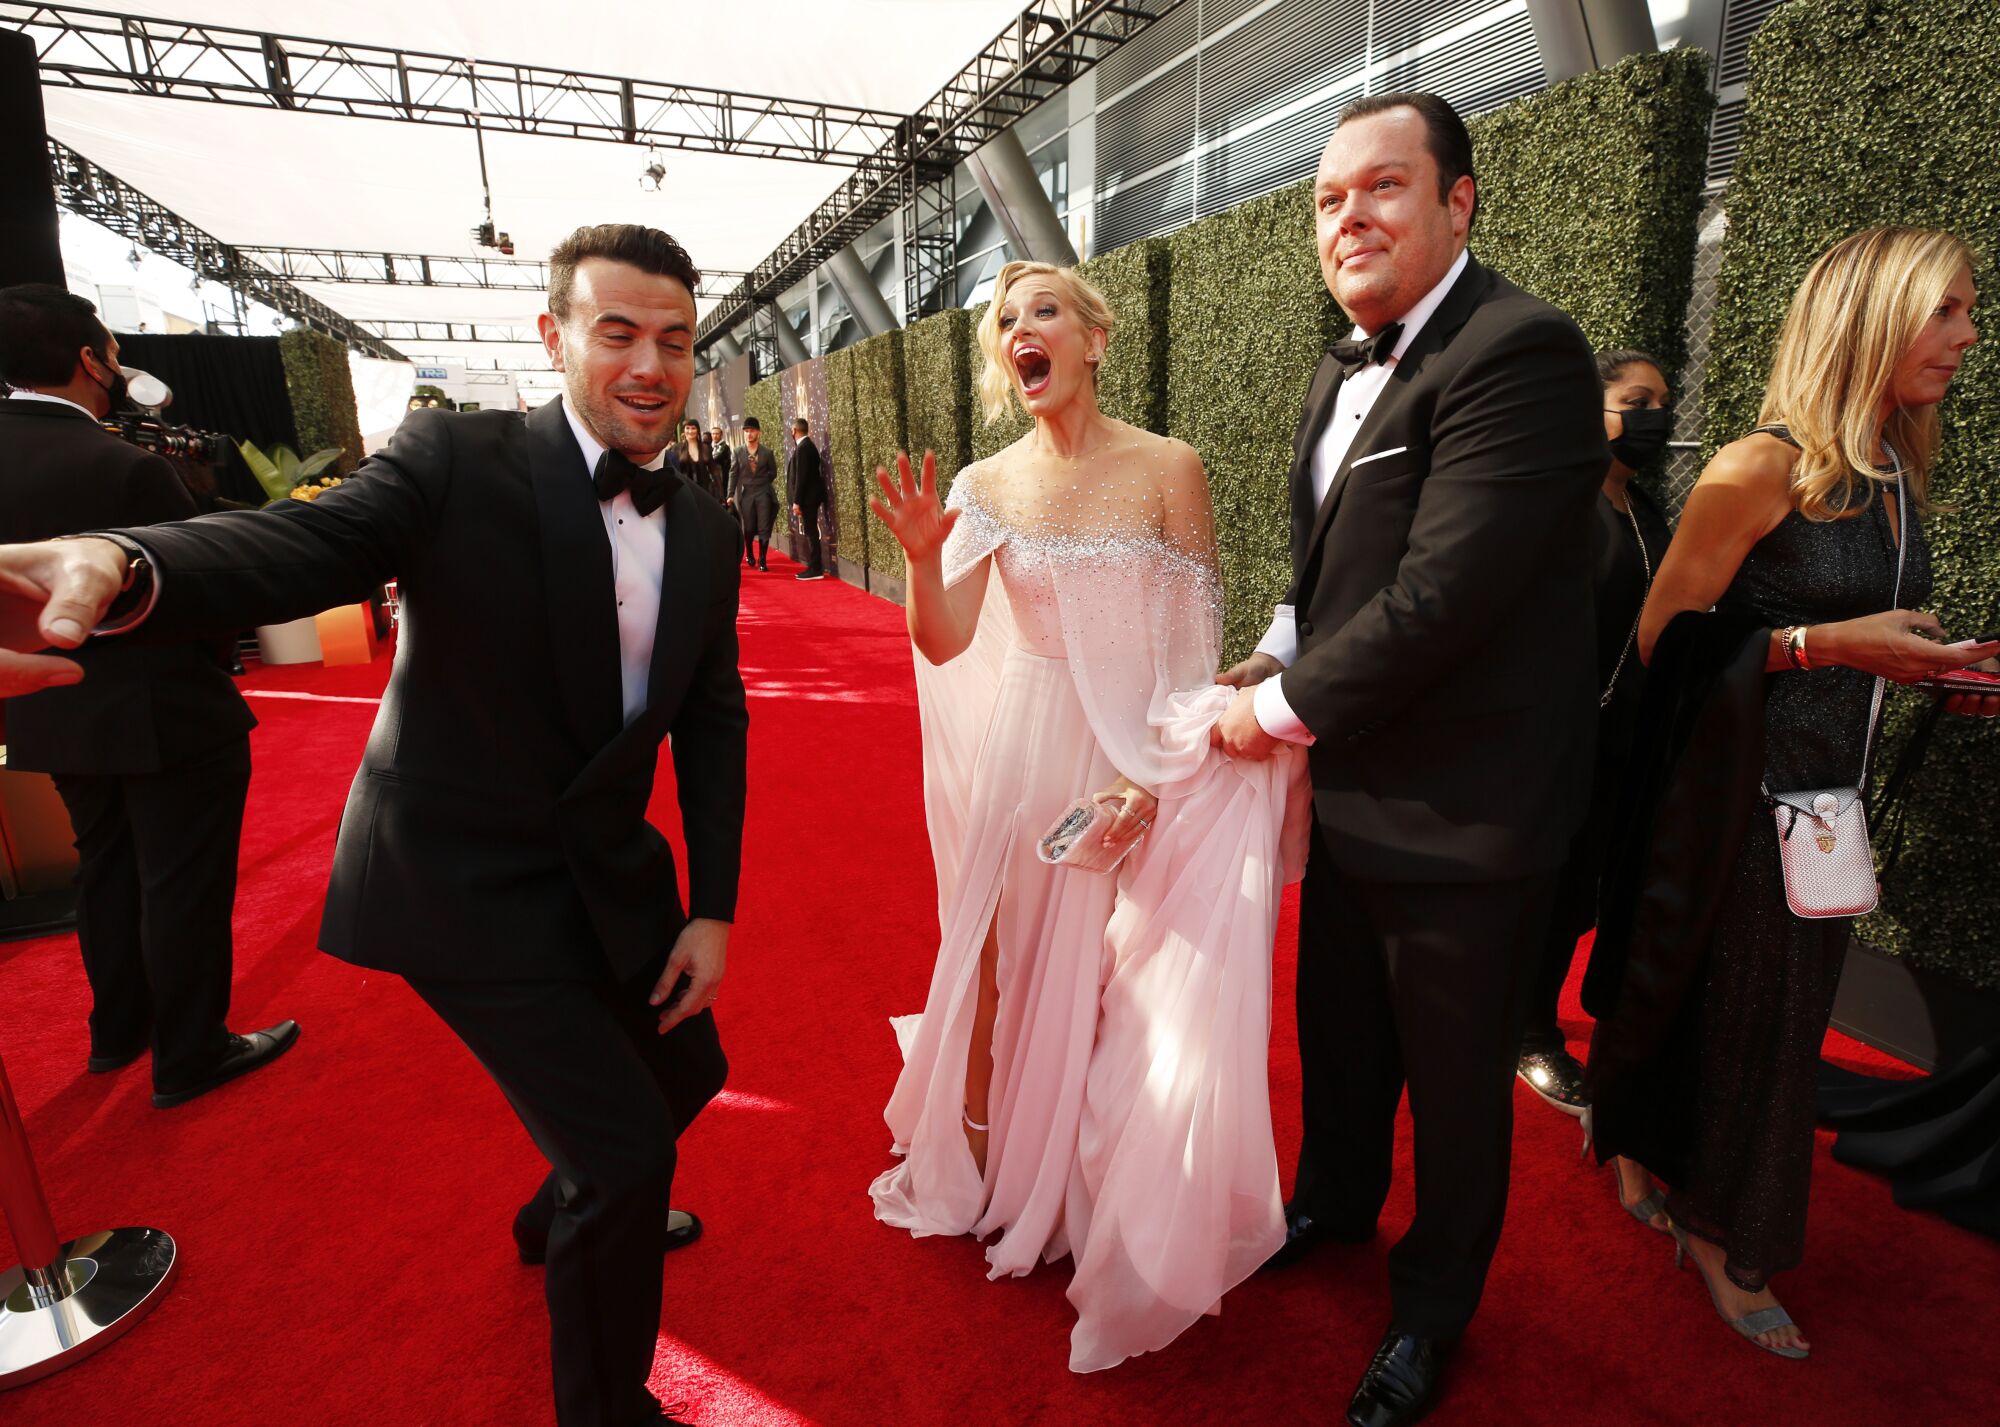 Beth Behrs and Michael Gladis in formal wear on the red carpet.